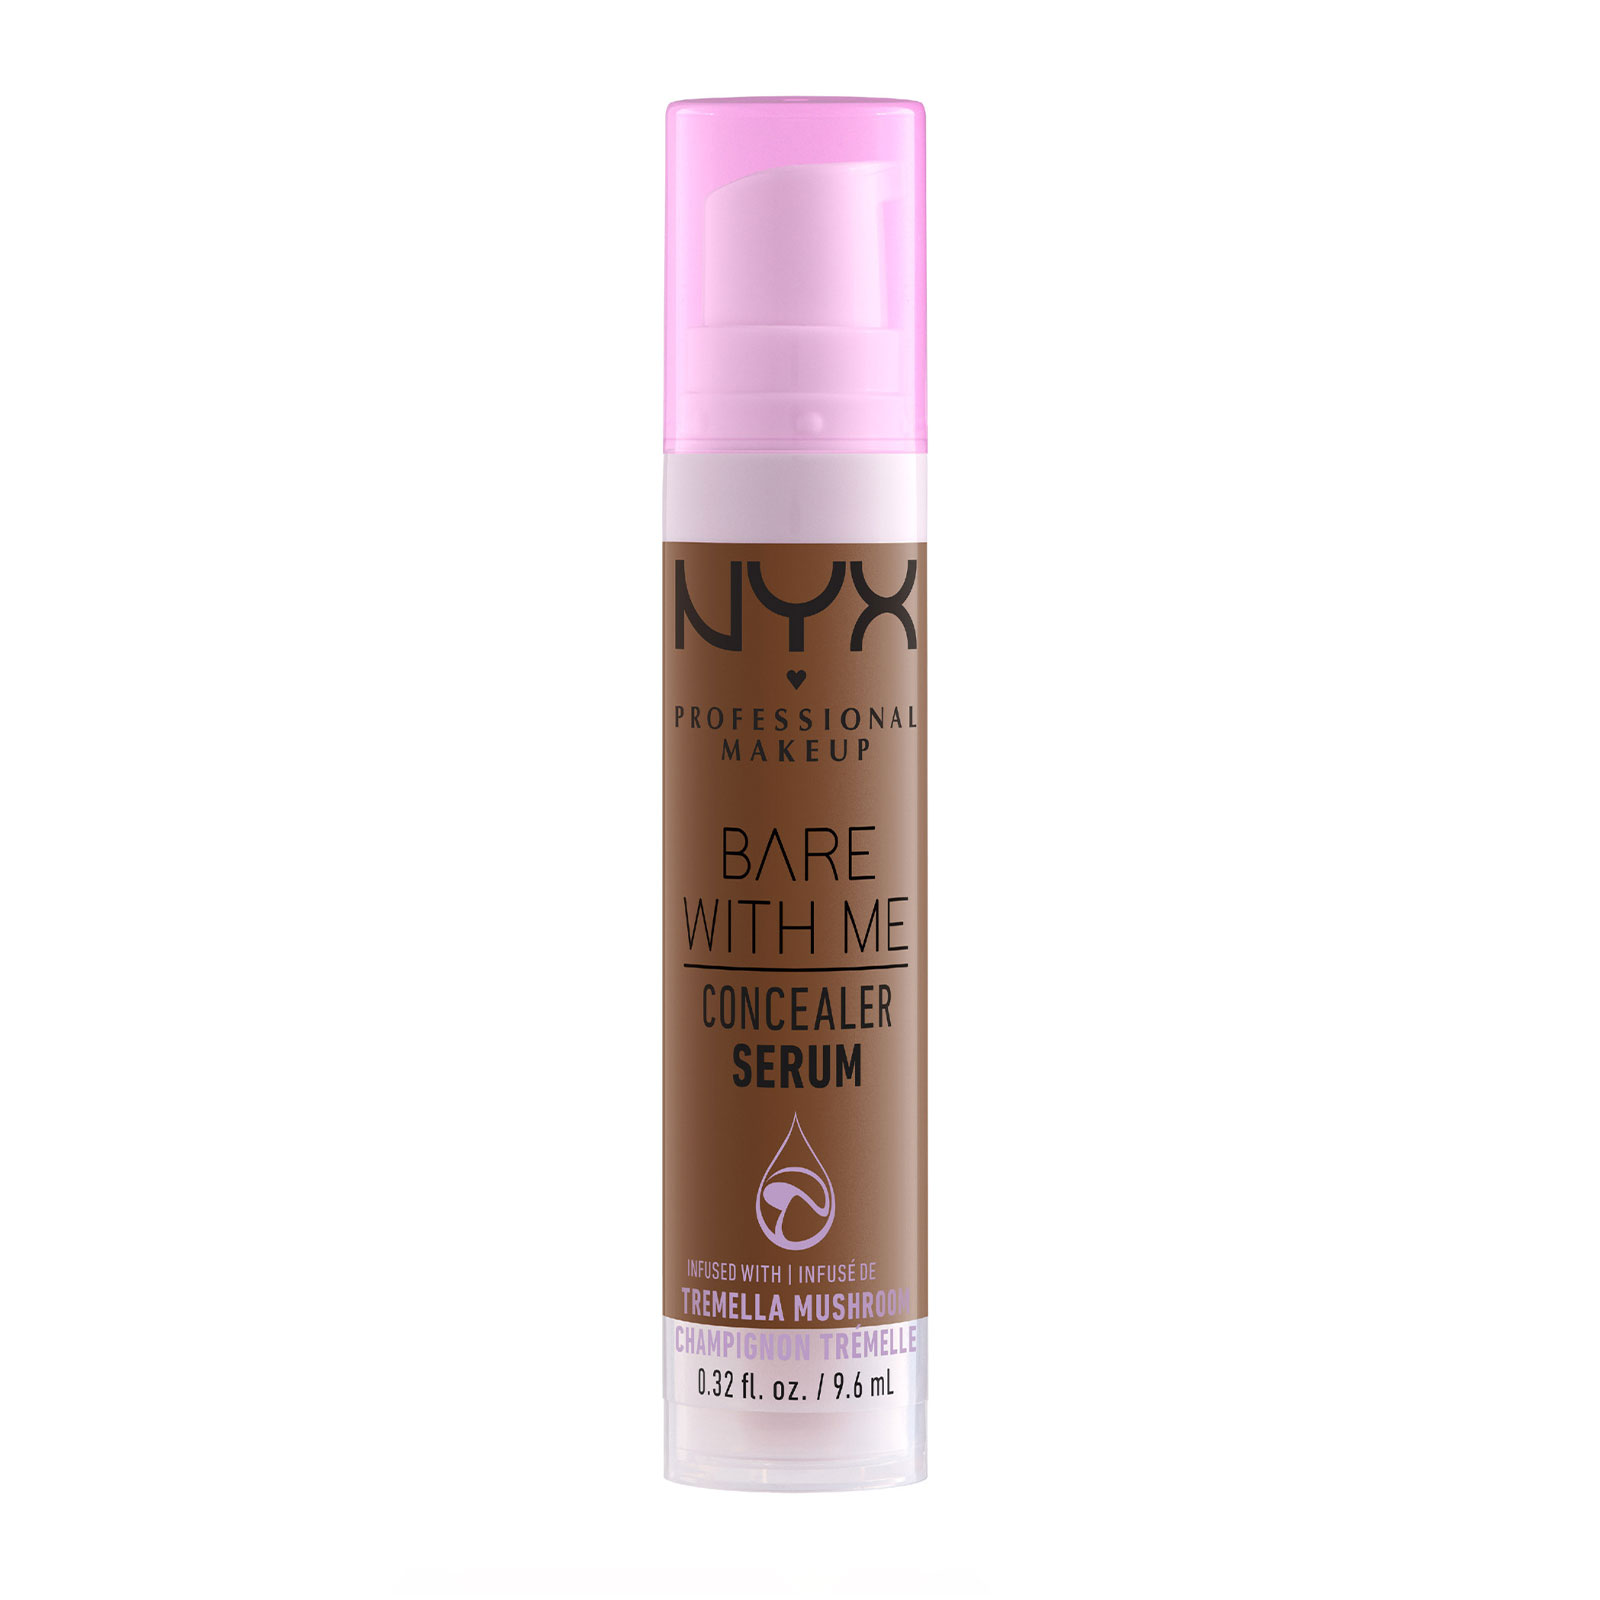 Nyx Professional Makeup Bare With Me Concealer Serum 9.6Ml 11 Mocha